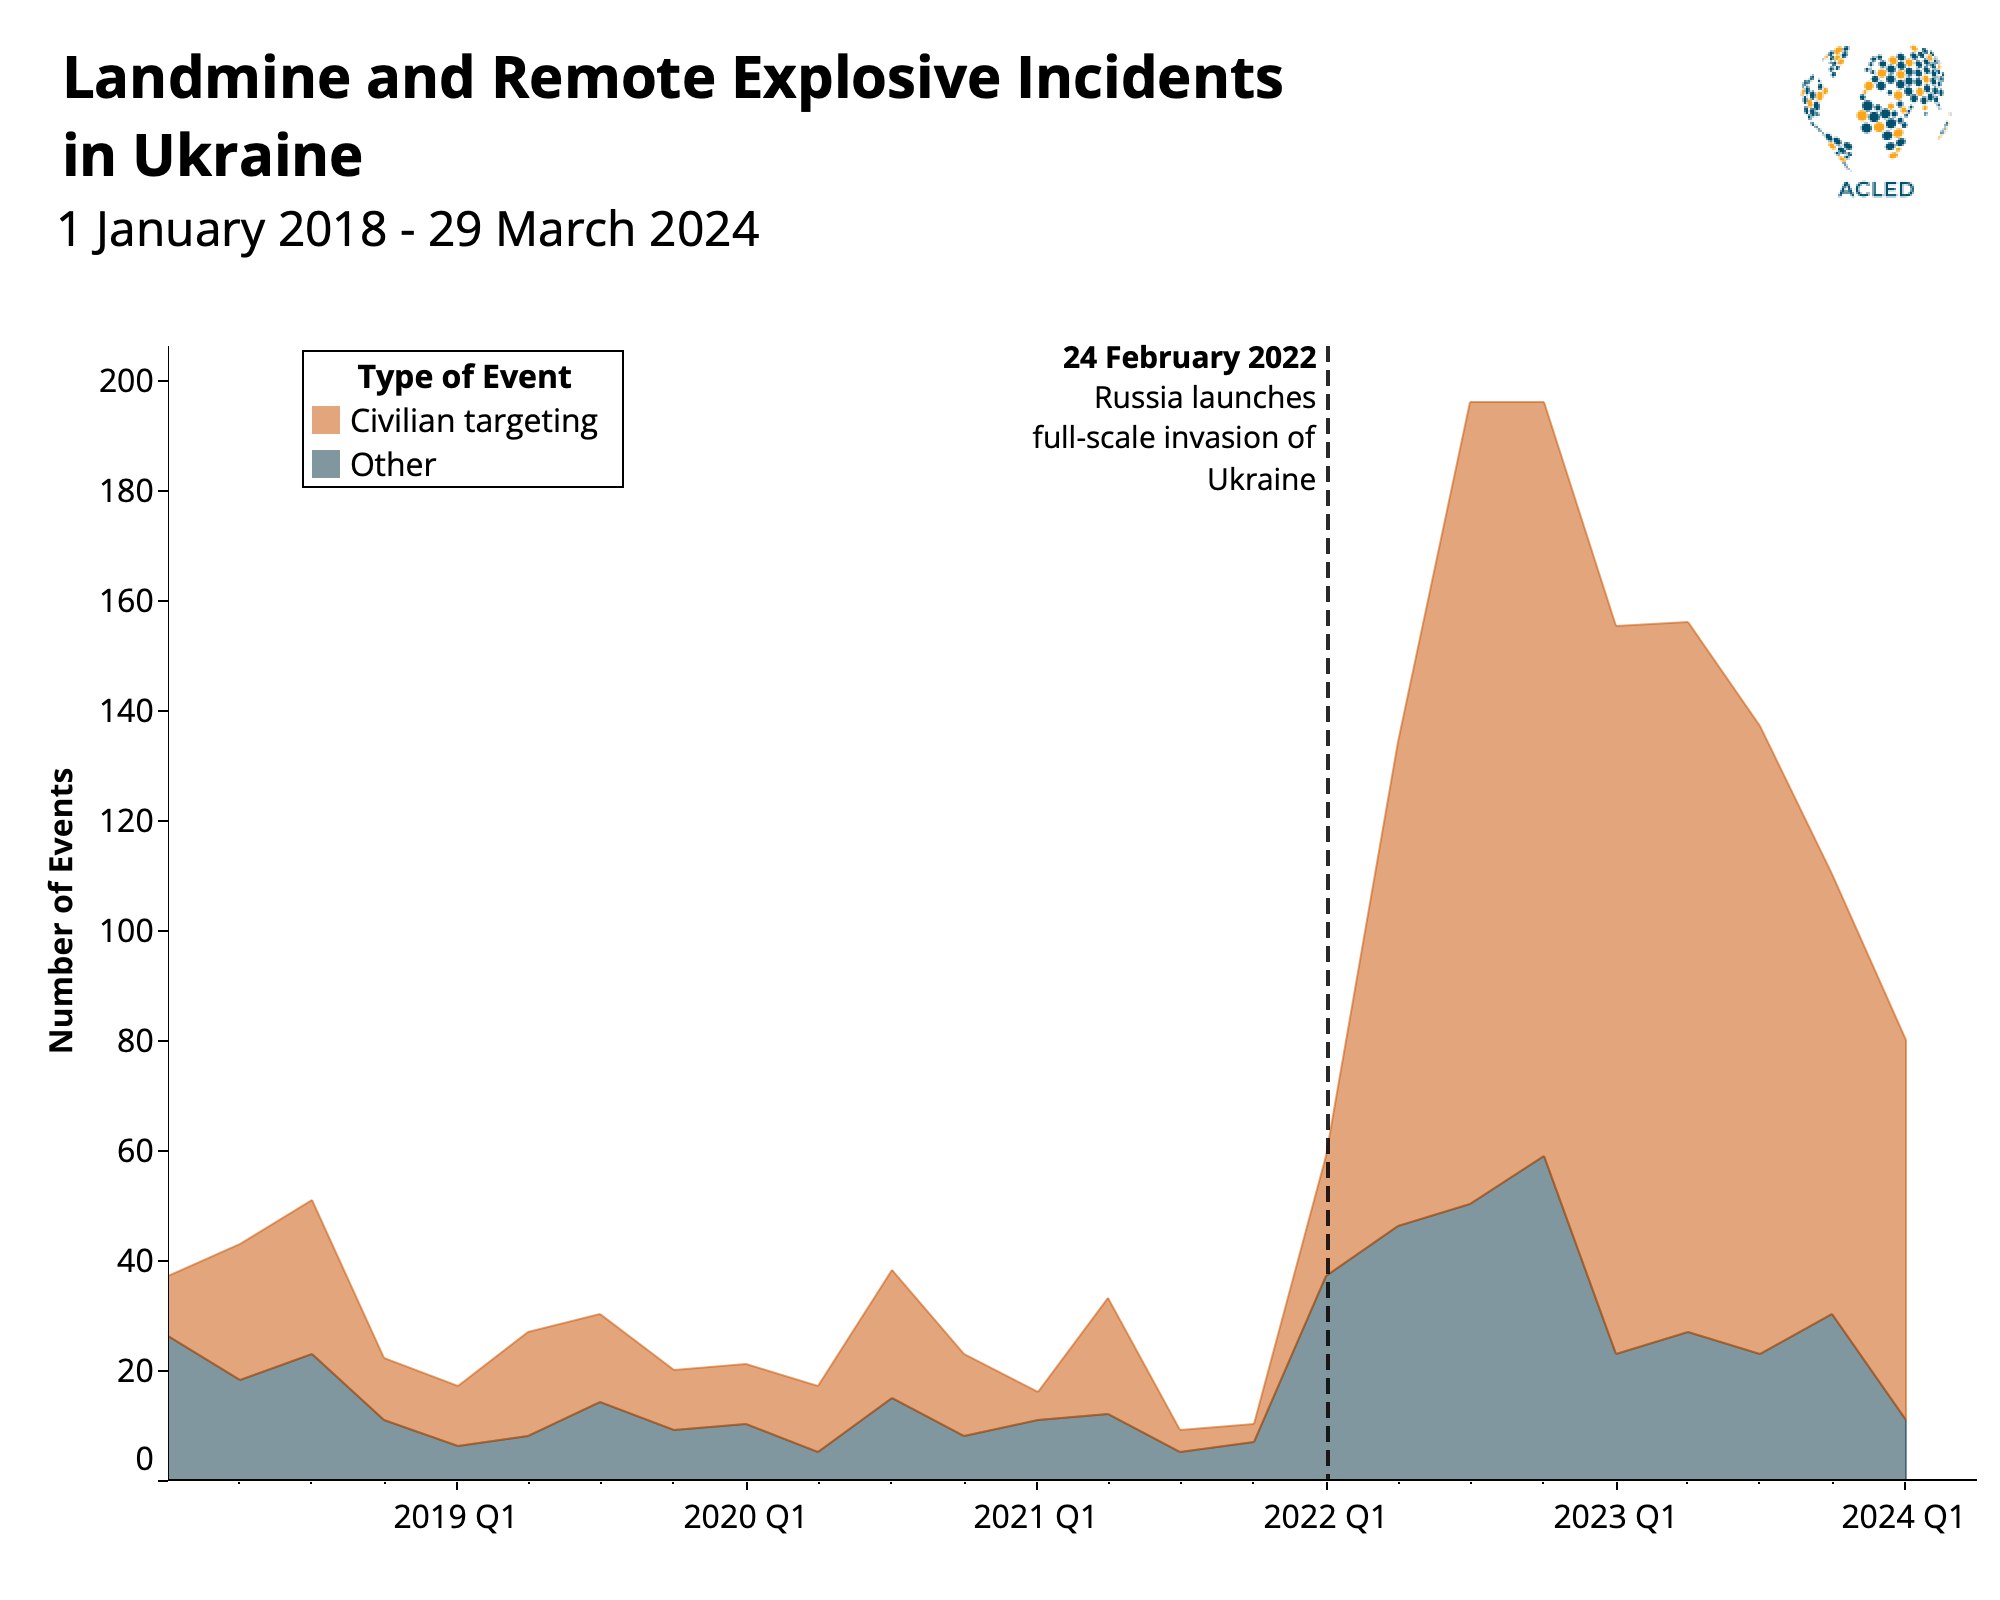 Infographic - Landmine and remote explosive incidents in Ukraine 1 January 2018 until 29 March 2024